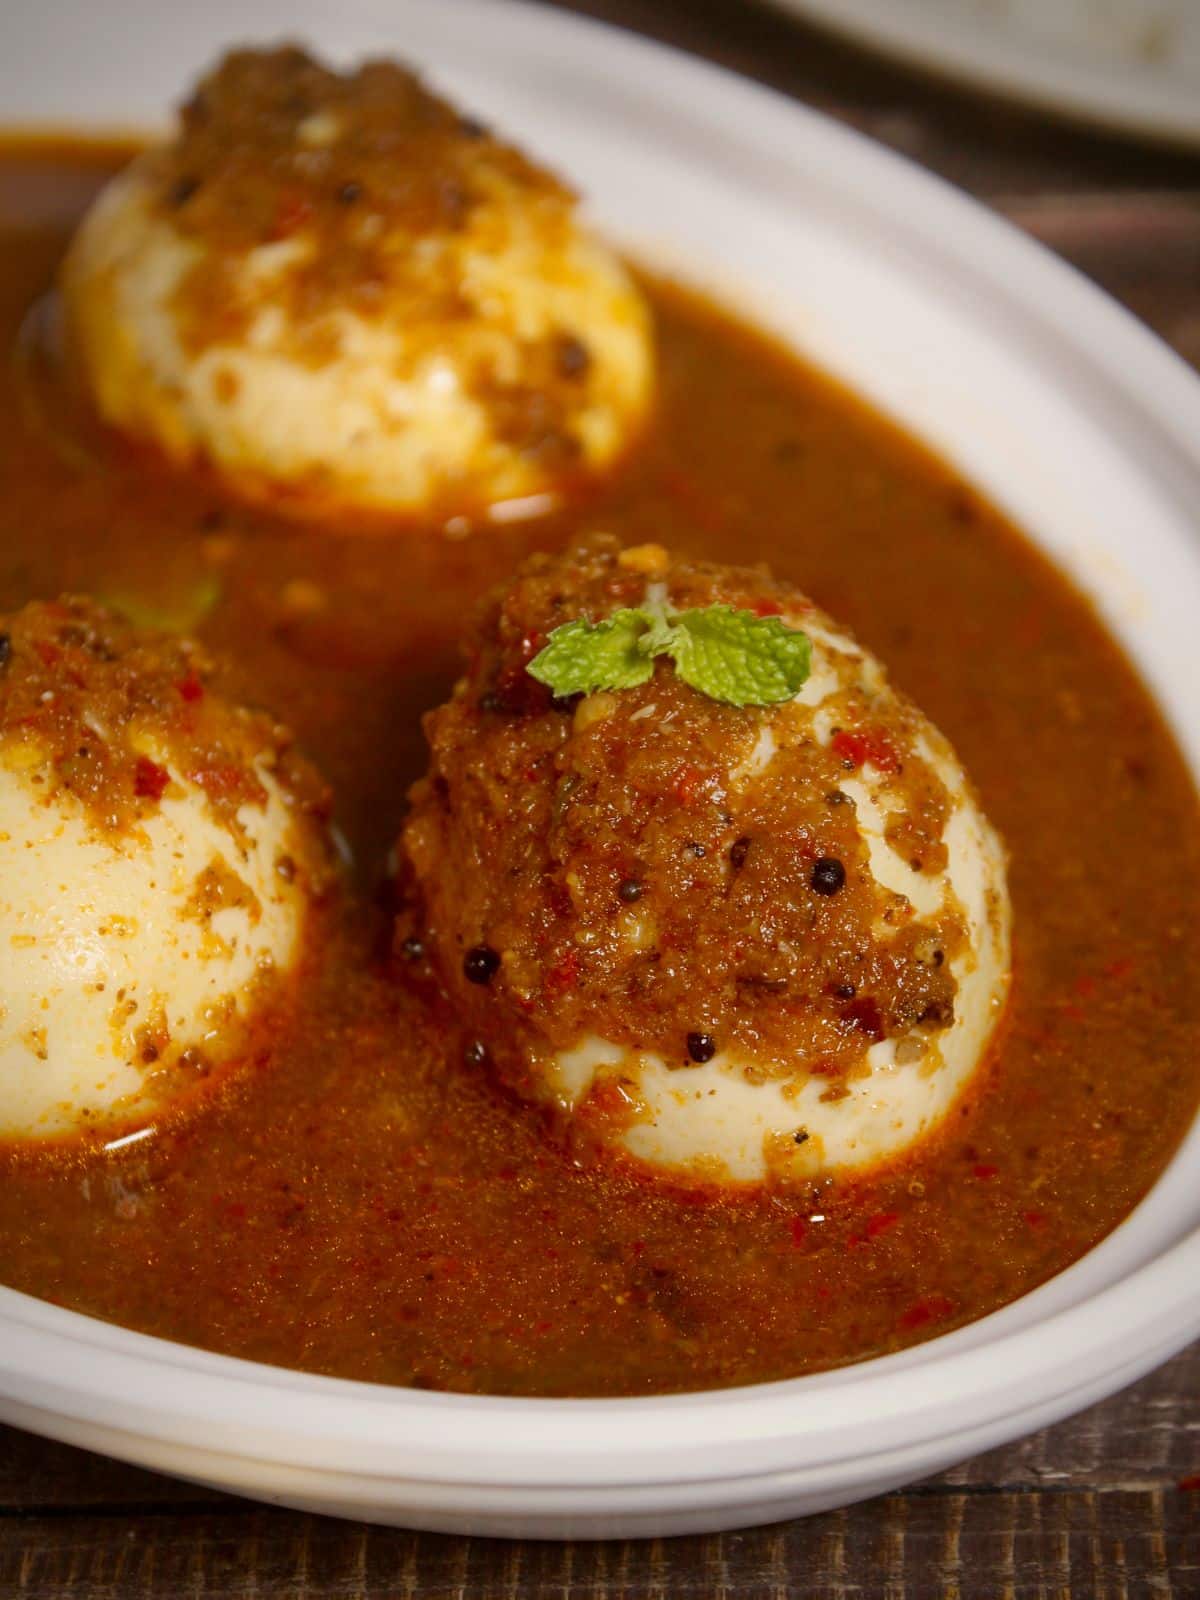 Zoom in image of Chettinad style egg curry